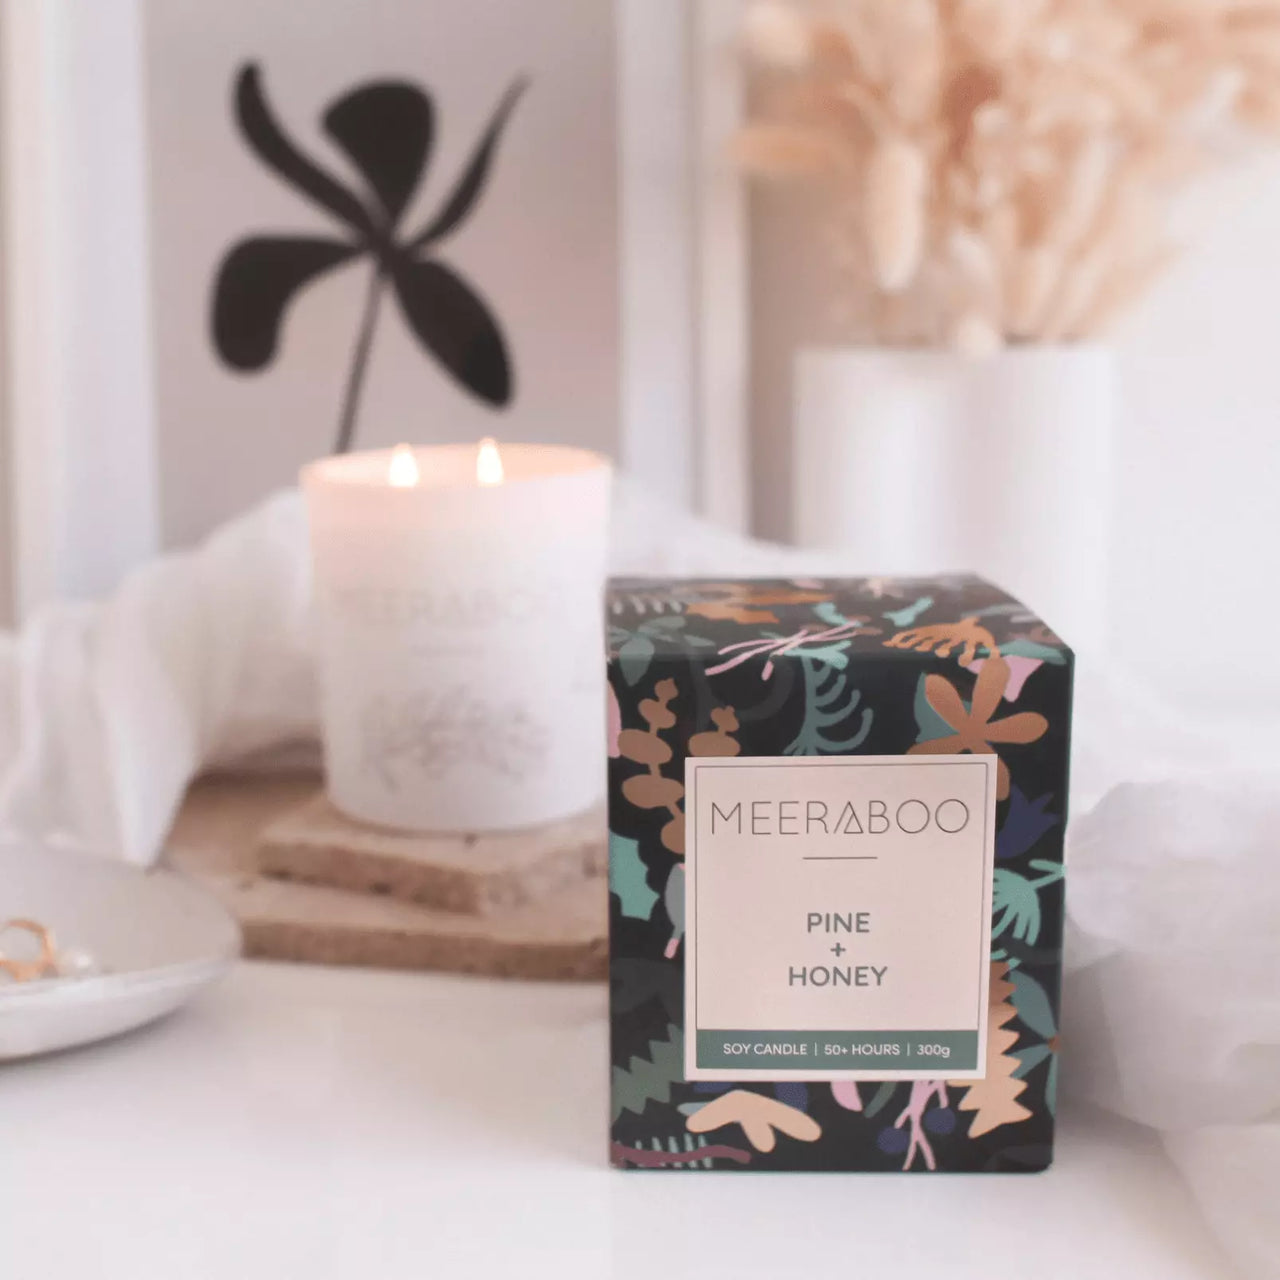 A Meeraboo Boxed Soy Candle - Pine + Honey is sitting on a table next to a candle.